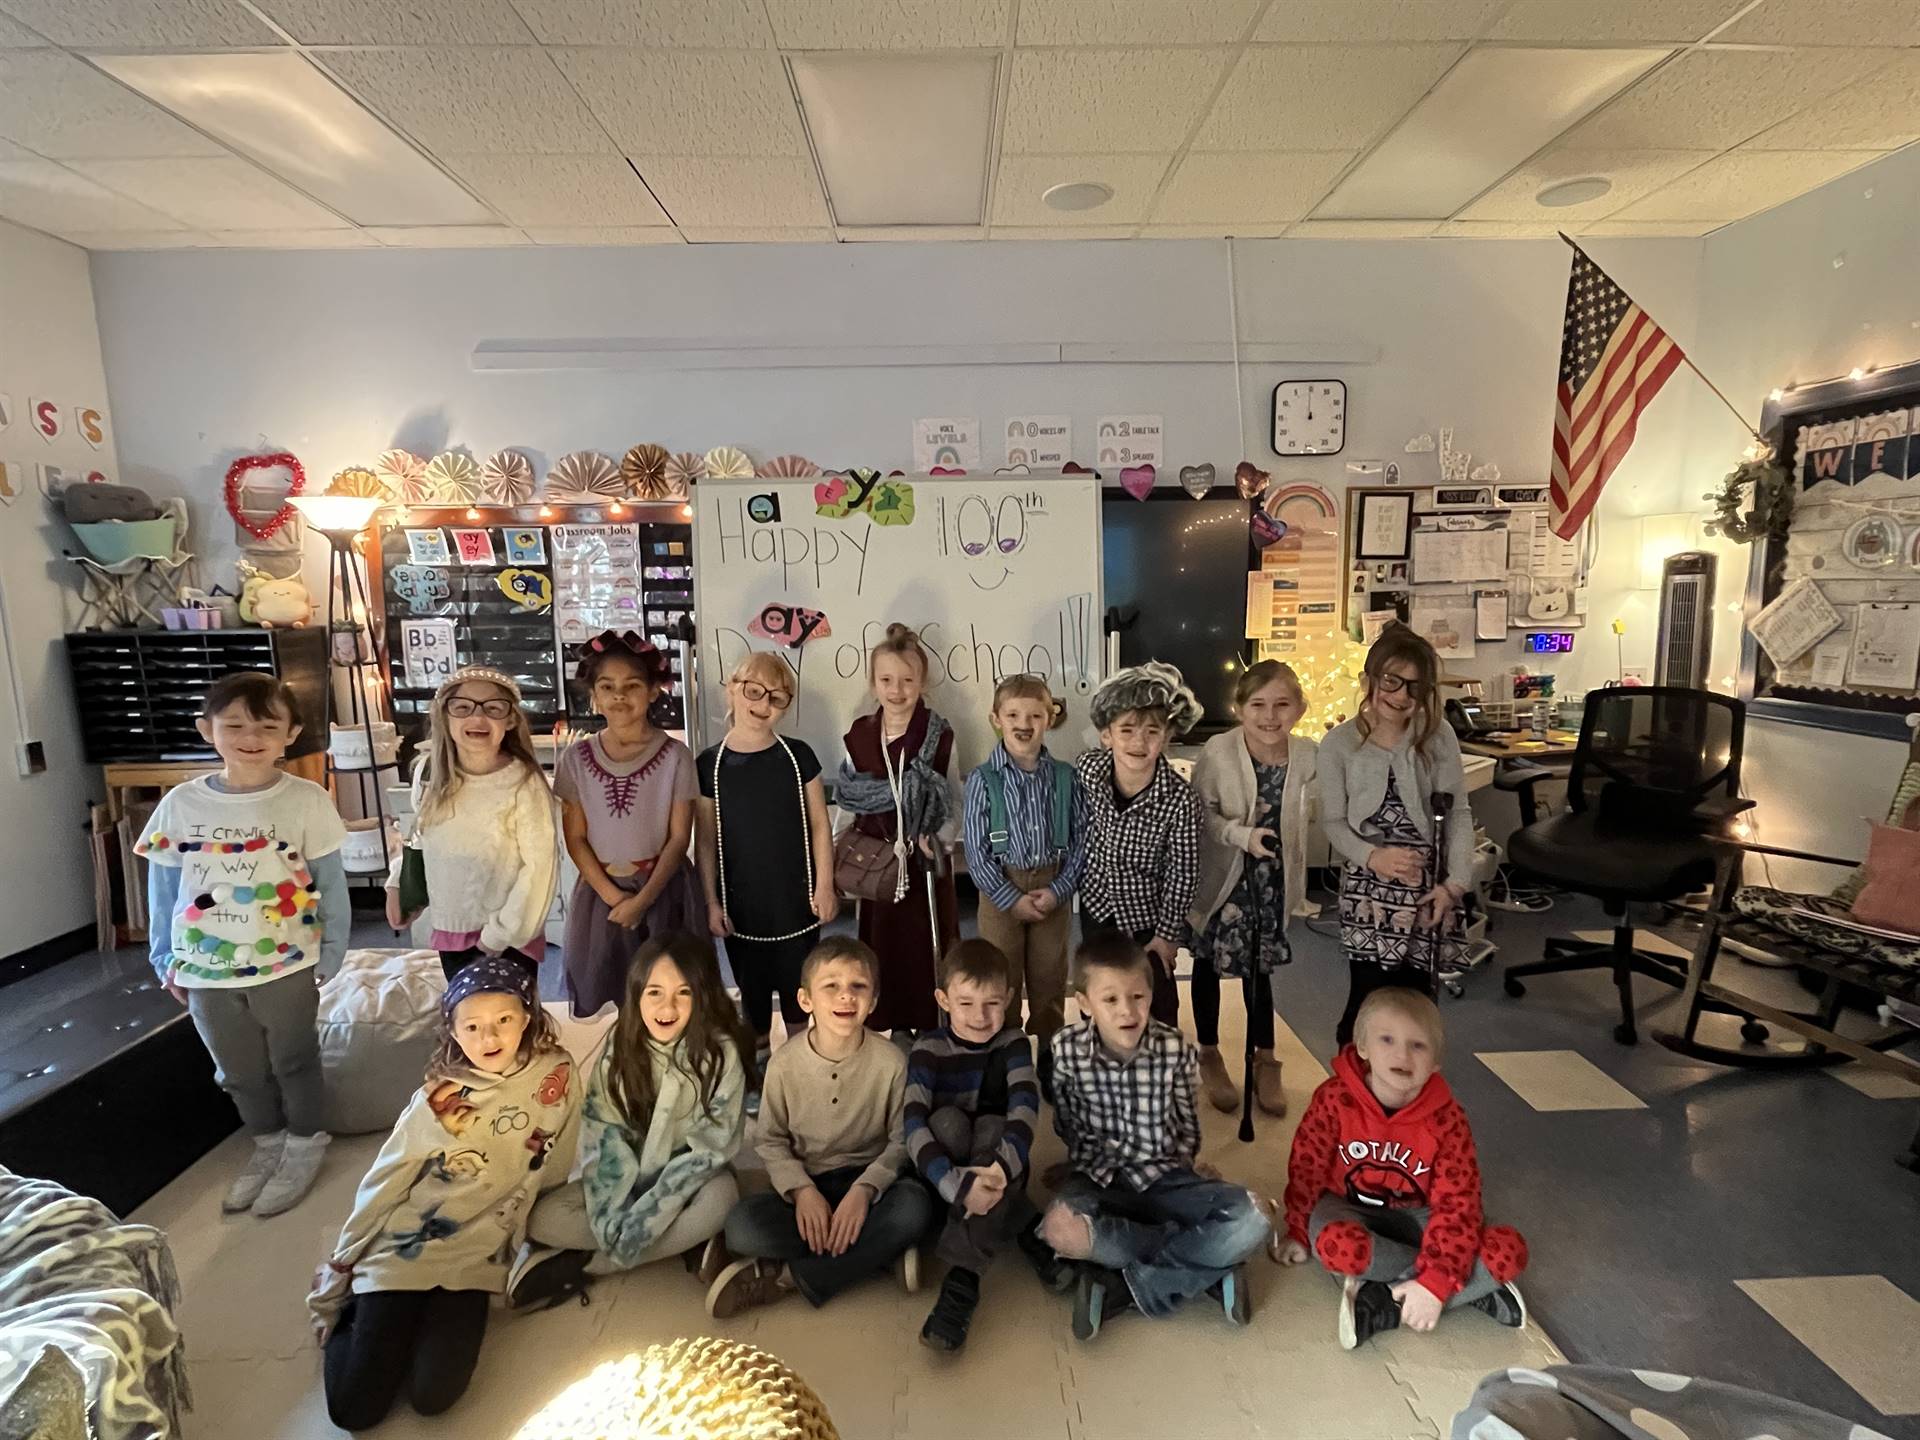 a class of students dressed as 100 y/o.